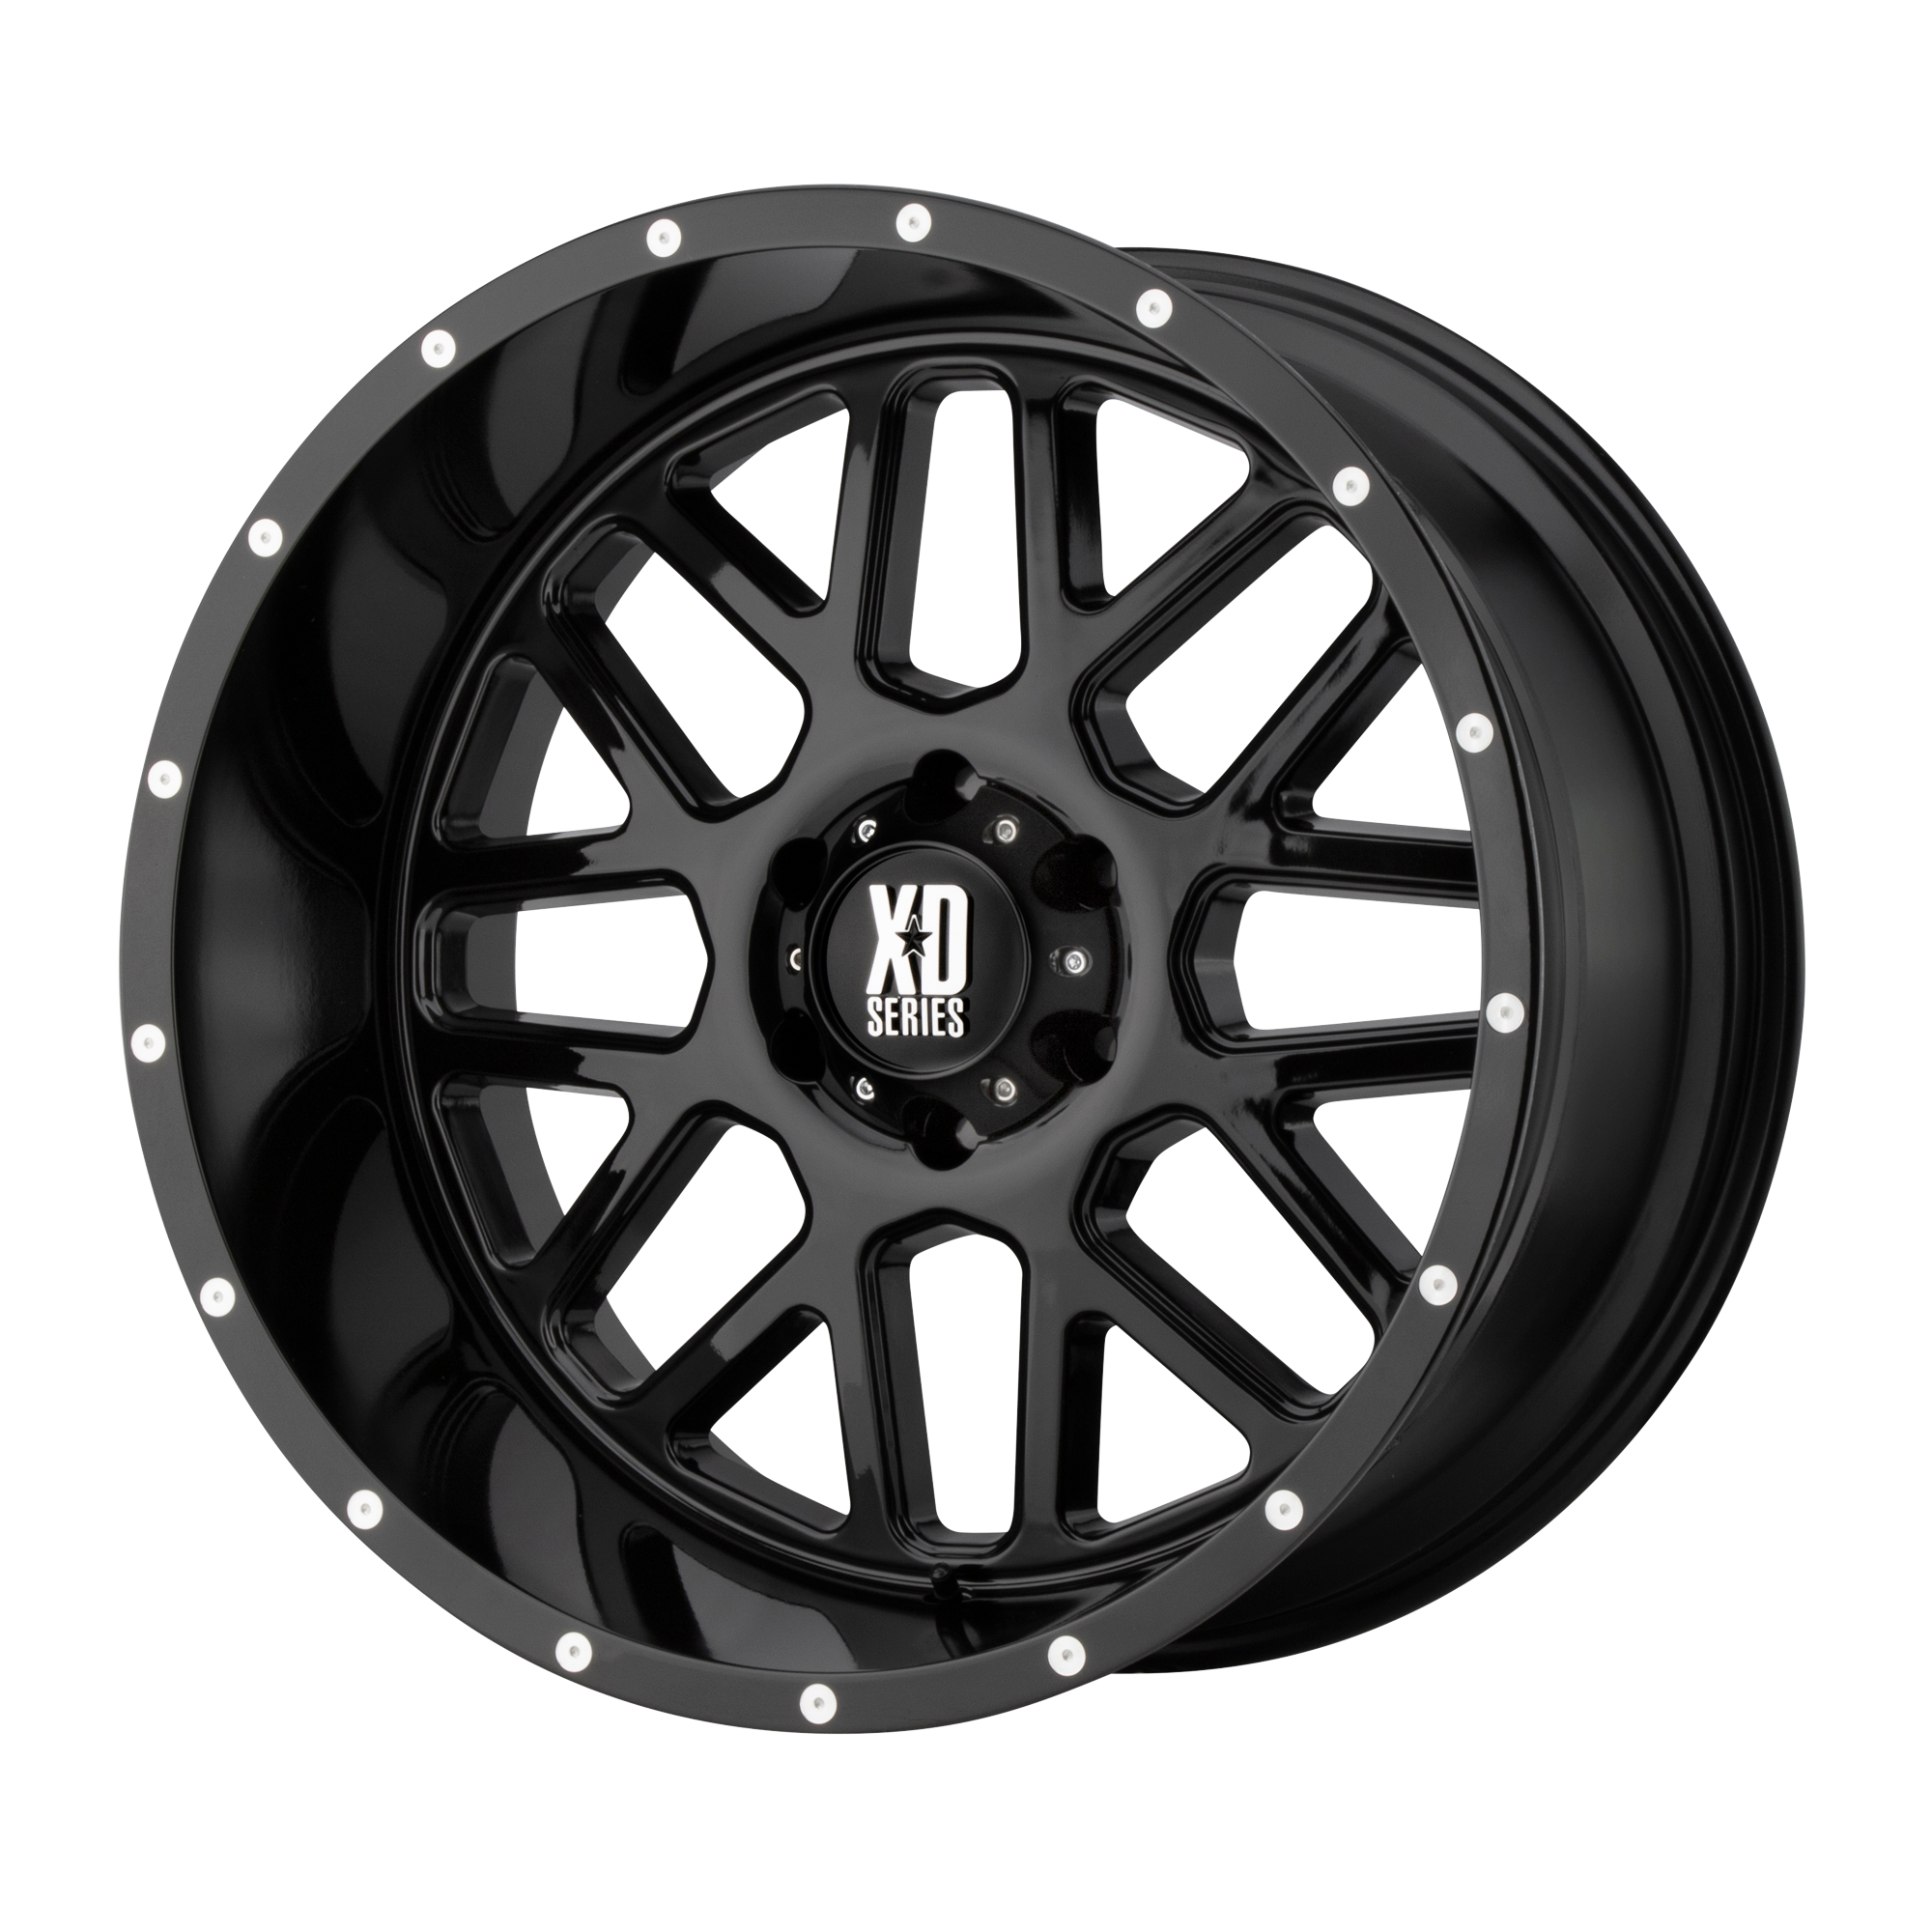 GRENADE 22x10 8x170.00 GLOSS BLACK (-24 mm) - Tires and Engine Performance